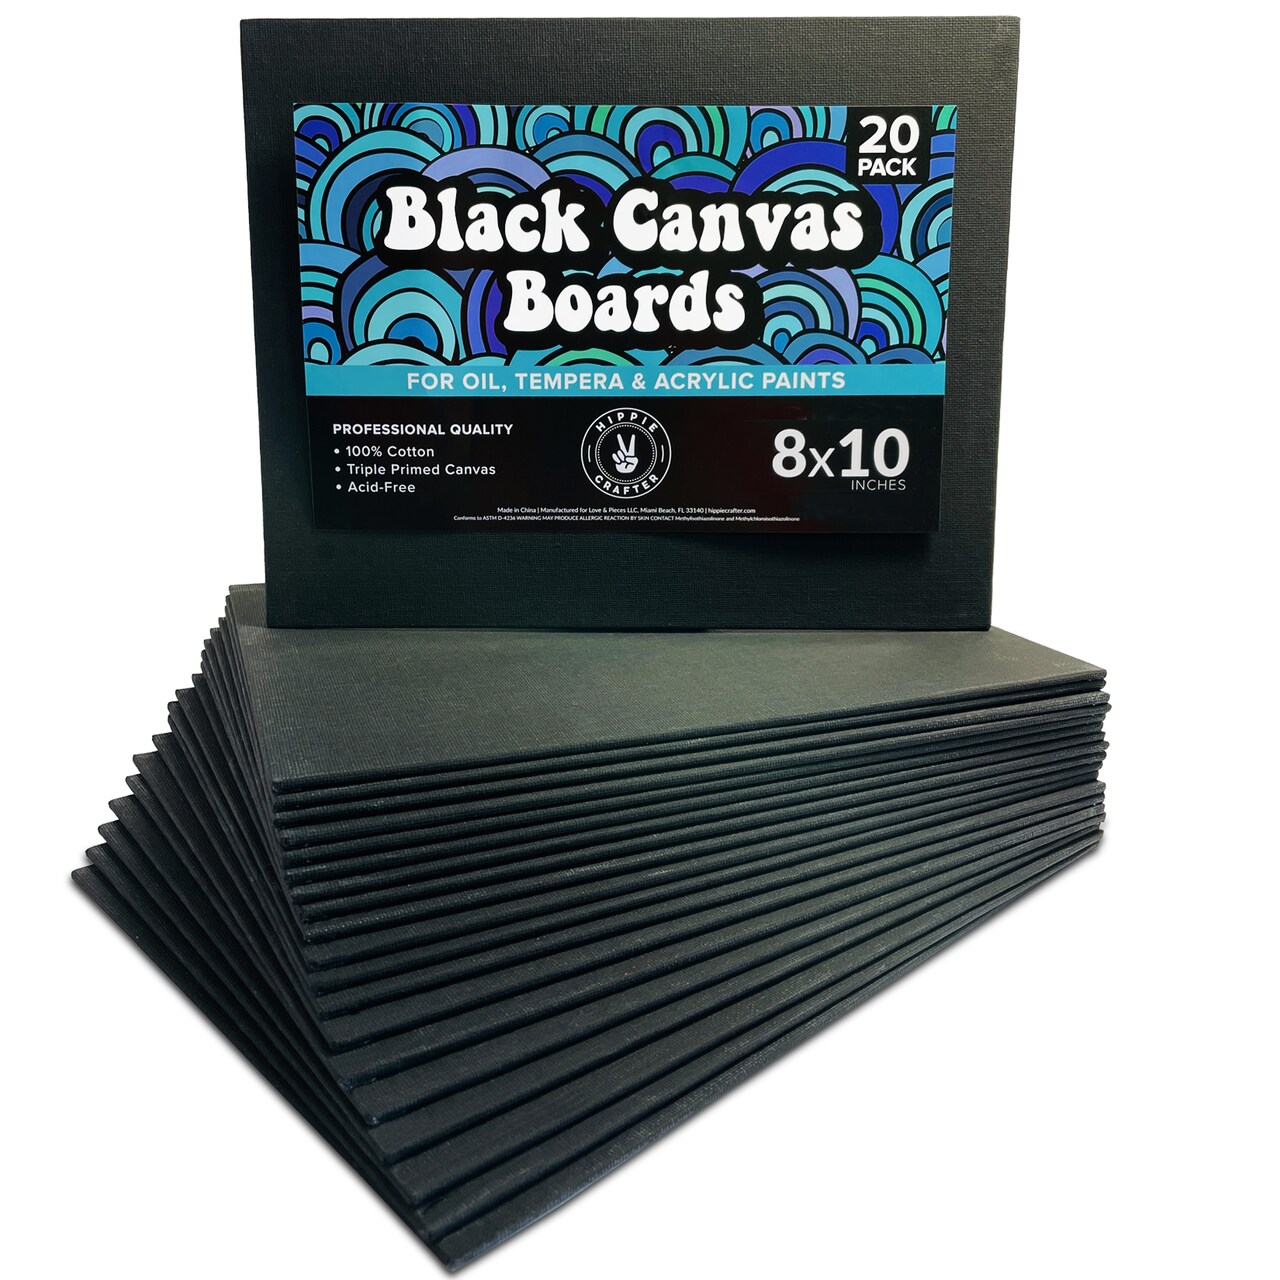 Black Canvas for Painting Bulk 20 Pack Small Canvases for Painting